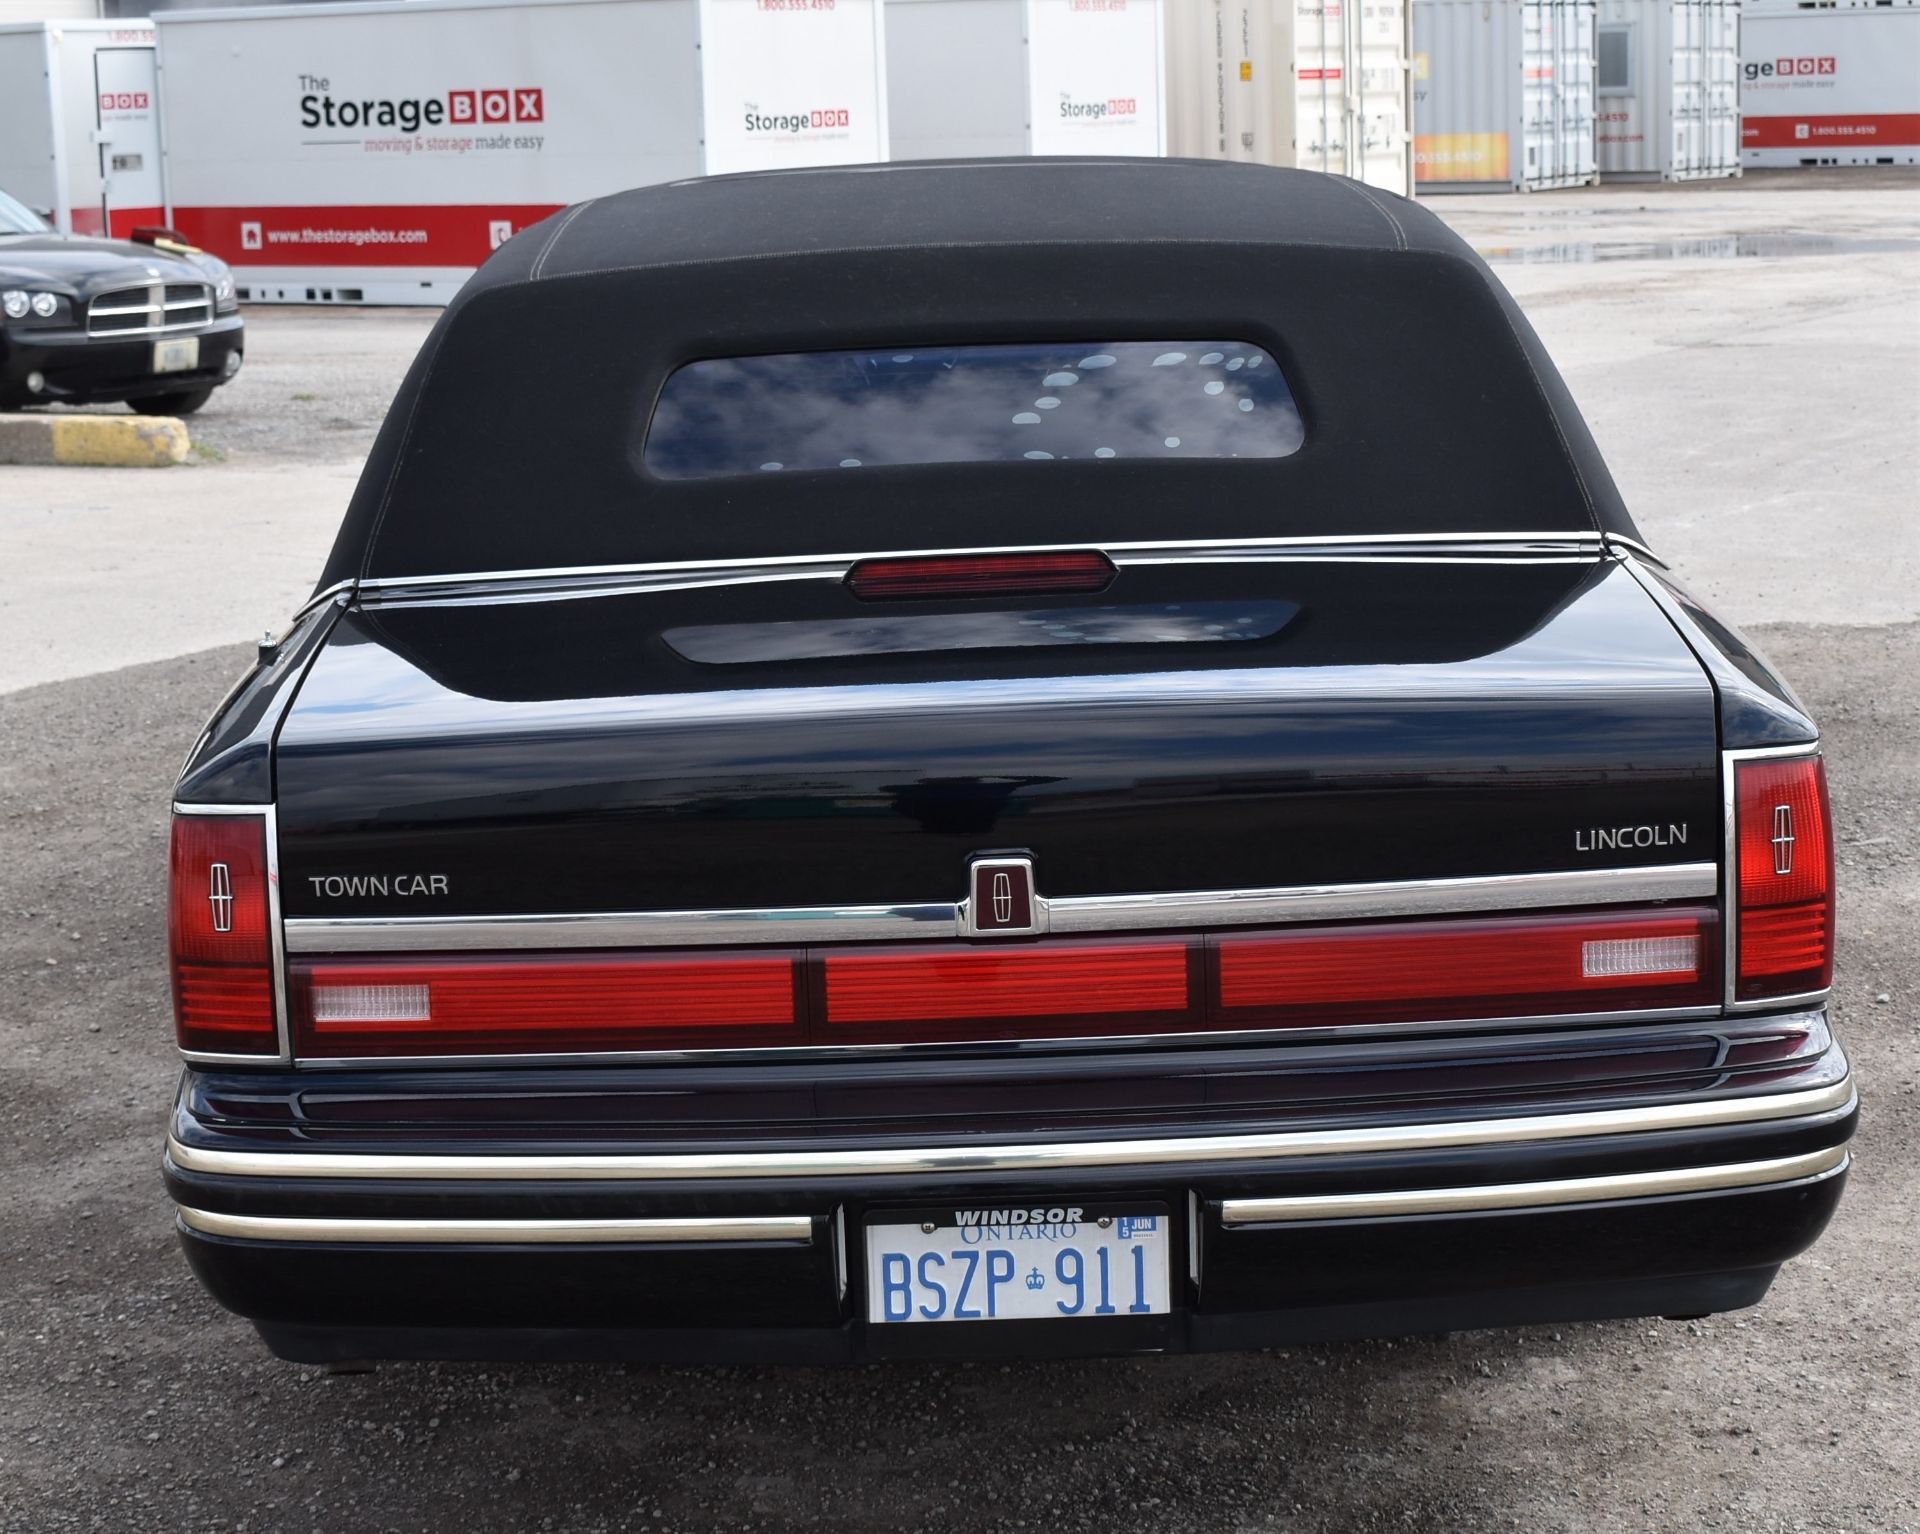 LINCOLN (1992) TOWN CAR 4 PASSENGER STRETCH LIMOUSINE WITH 8 CYLINDER 4.6L GAS ENGINE, 321,116KM ( - Image 5 of 21